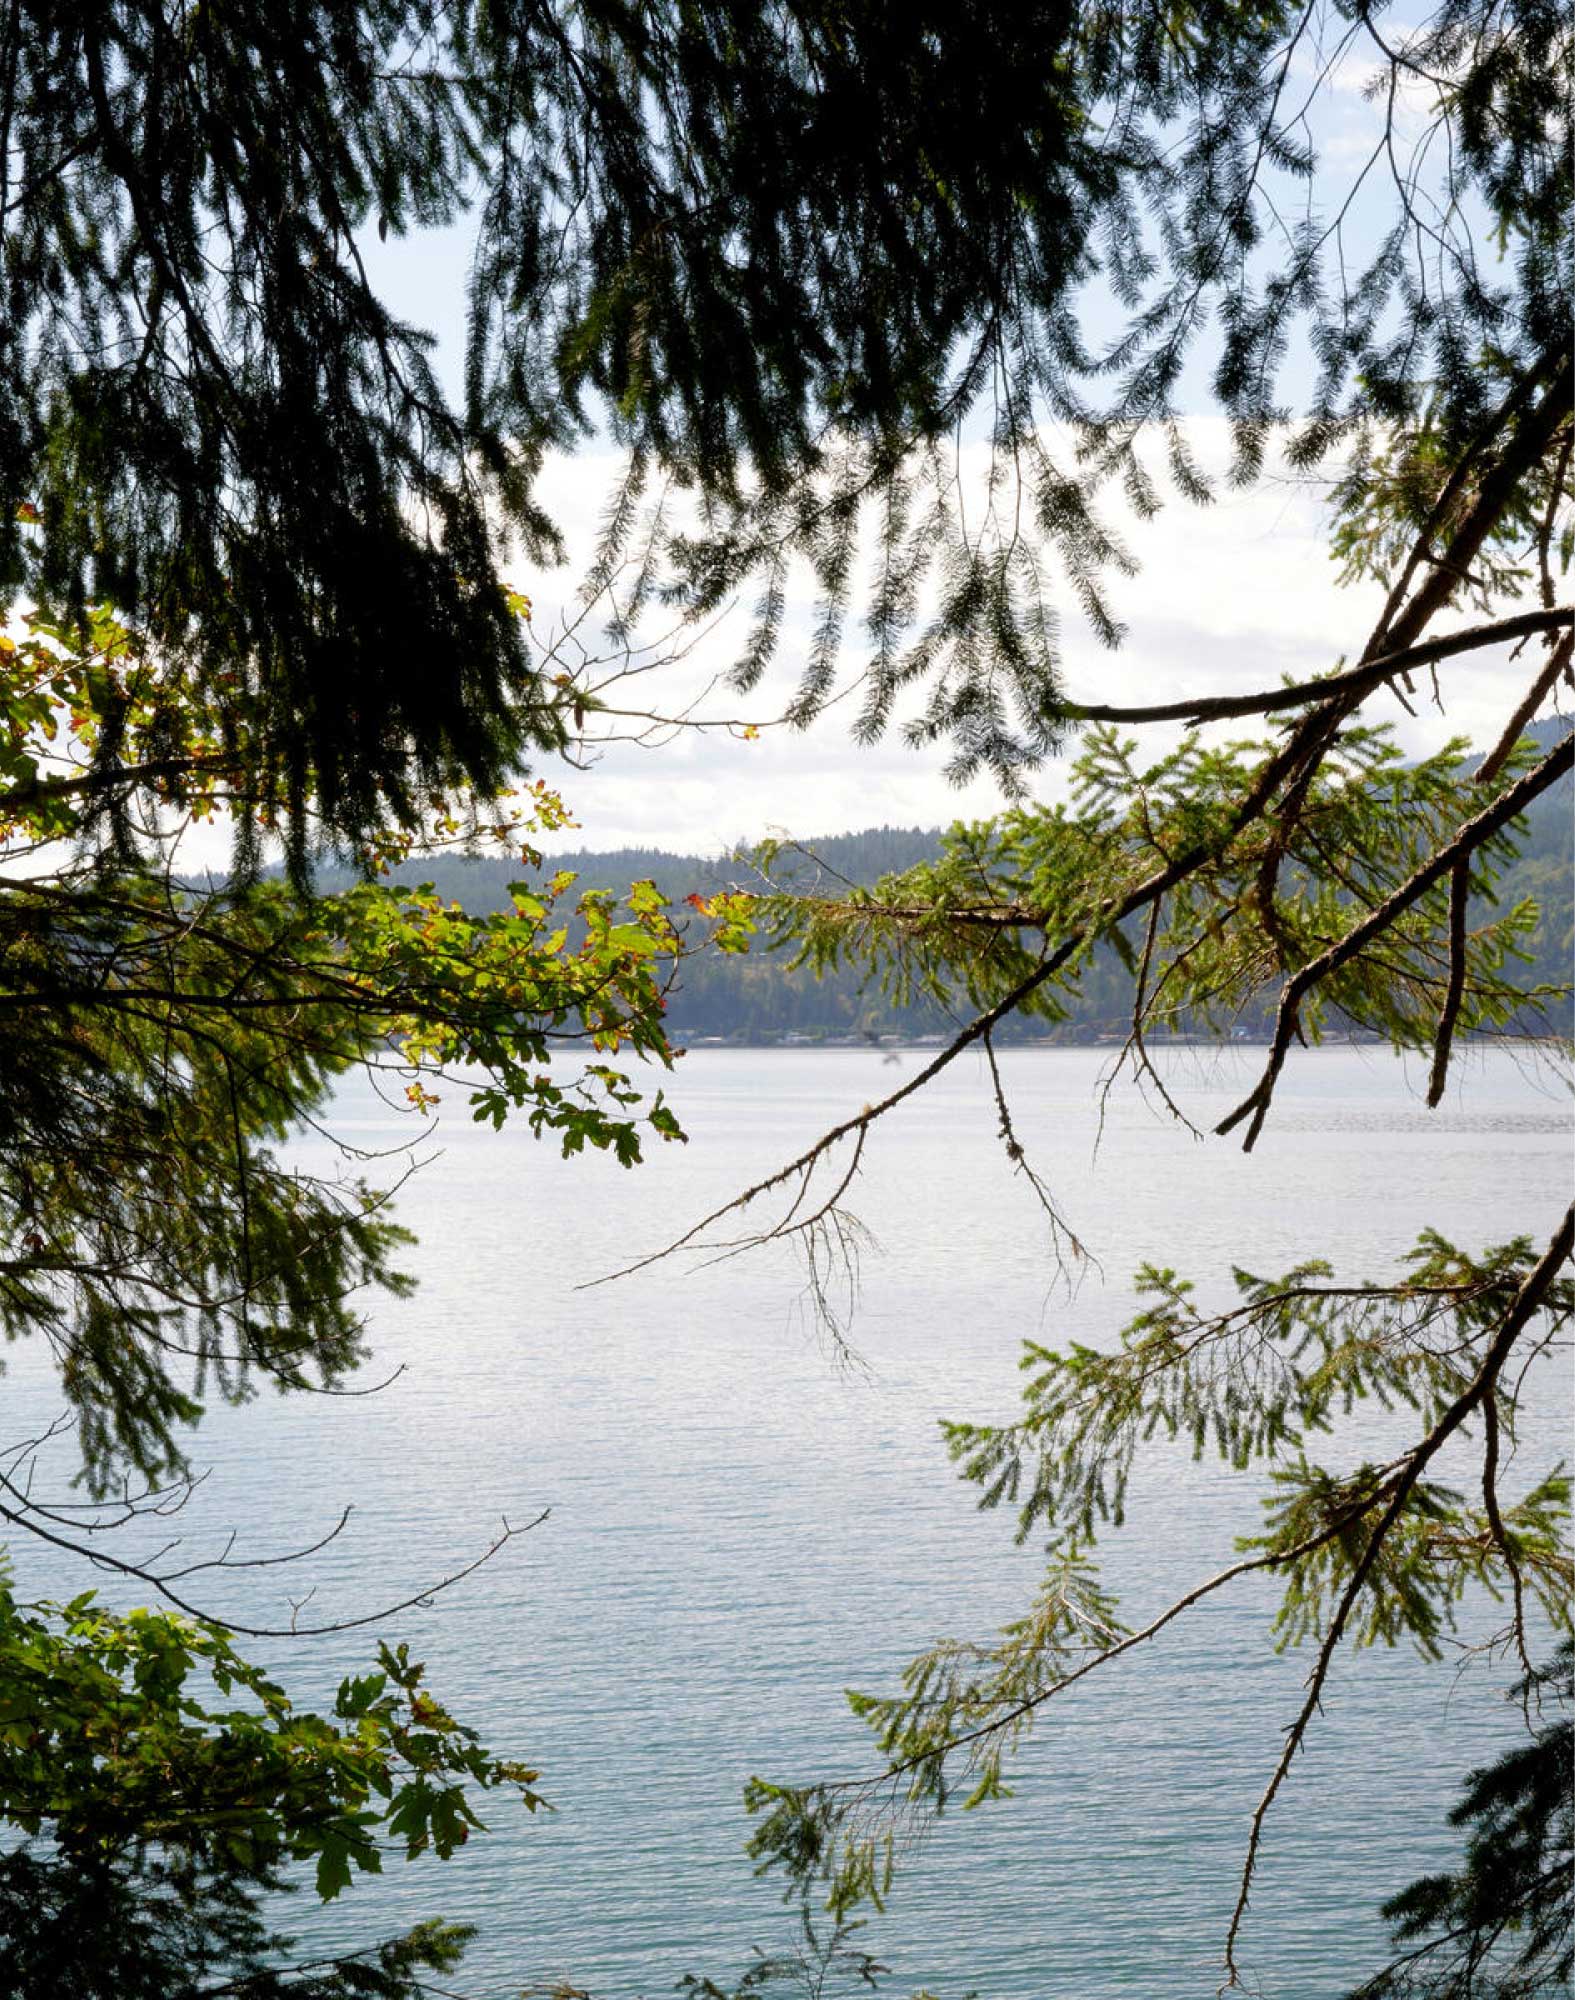 A glimpse of the lake through the trees.